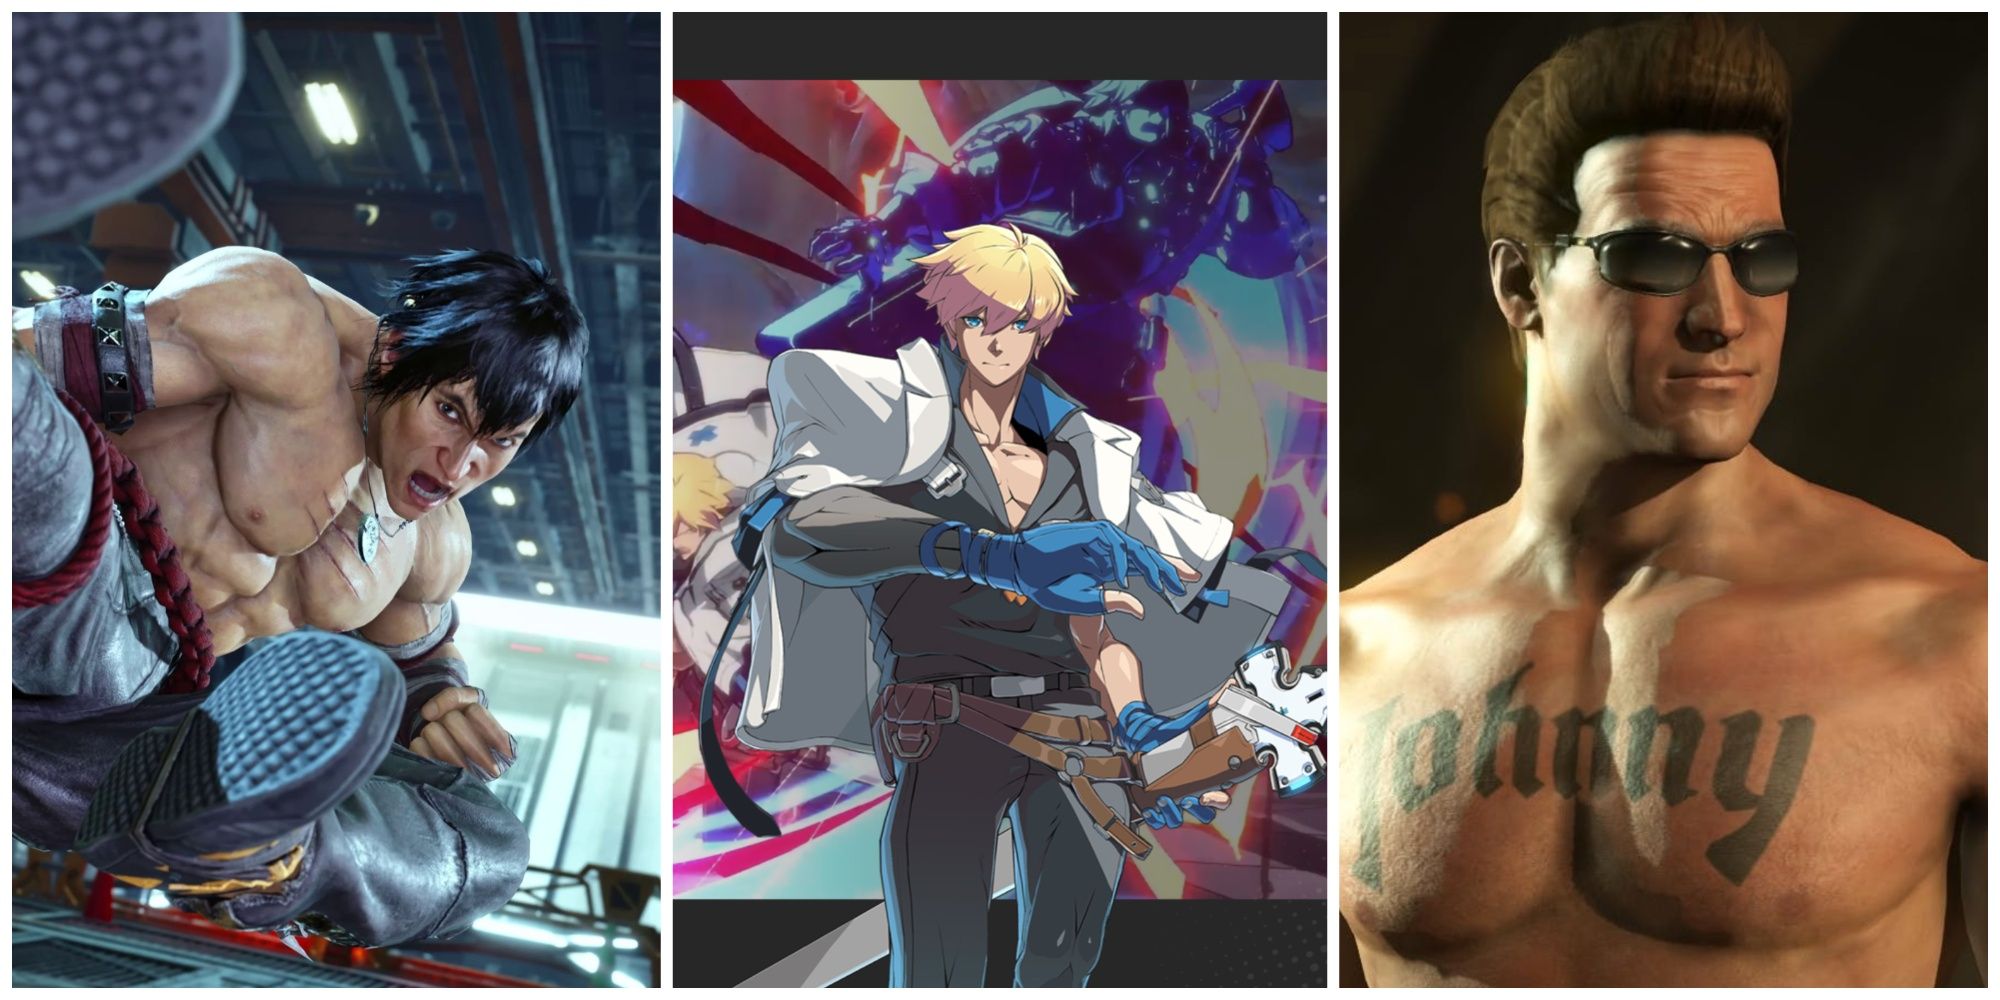 Marshall Law, Ky Kiske, and Johnny Cage